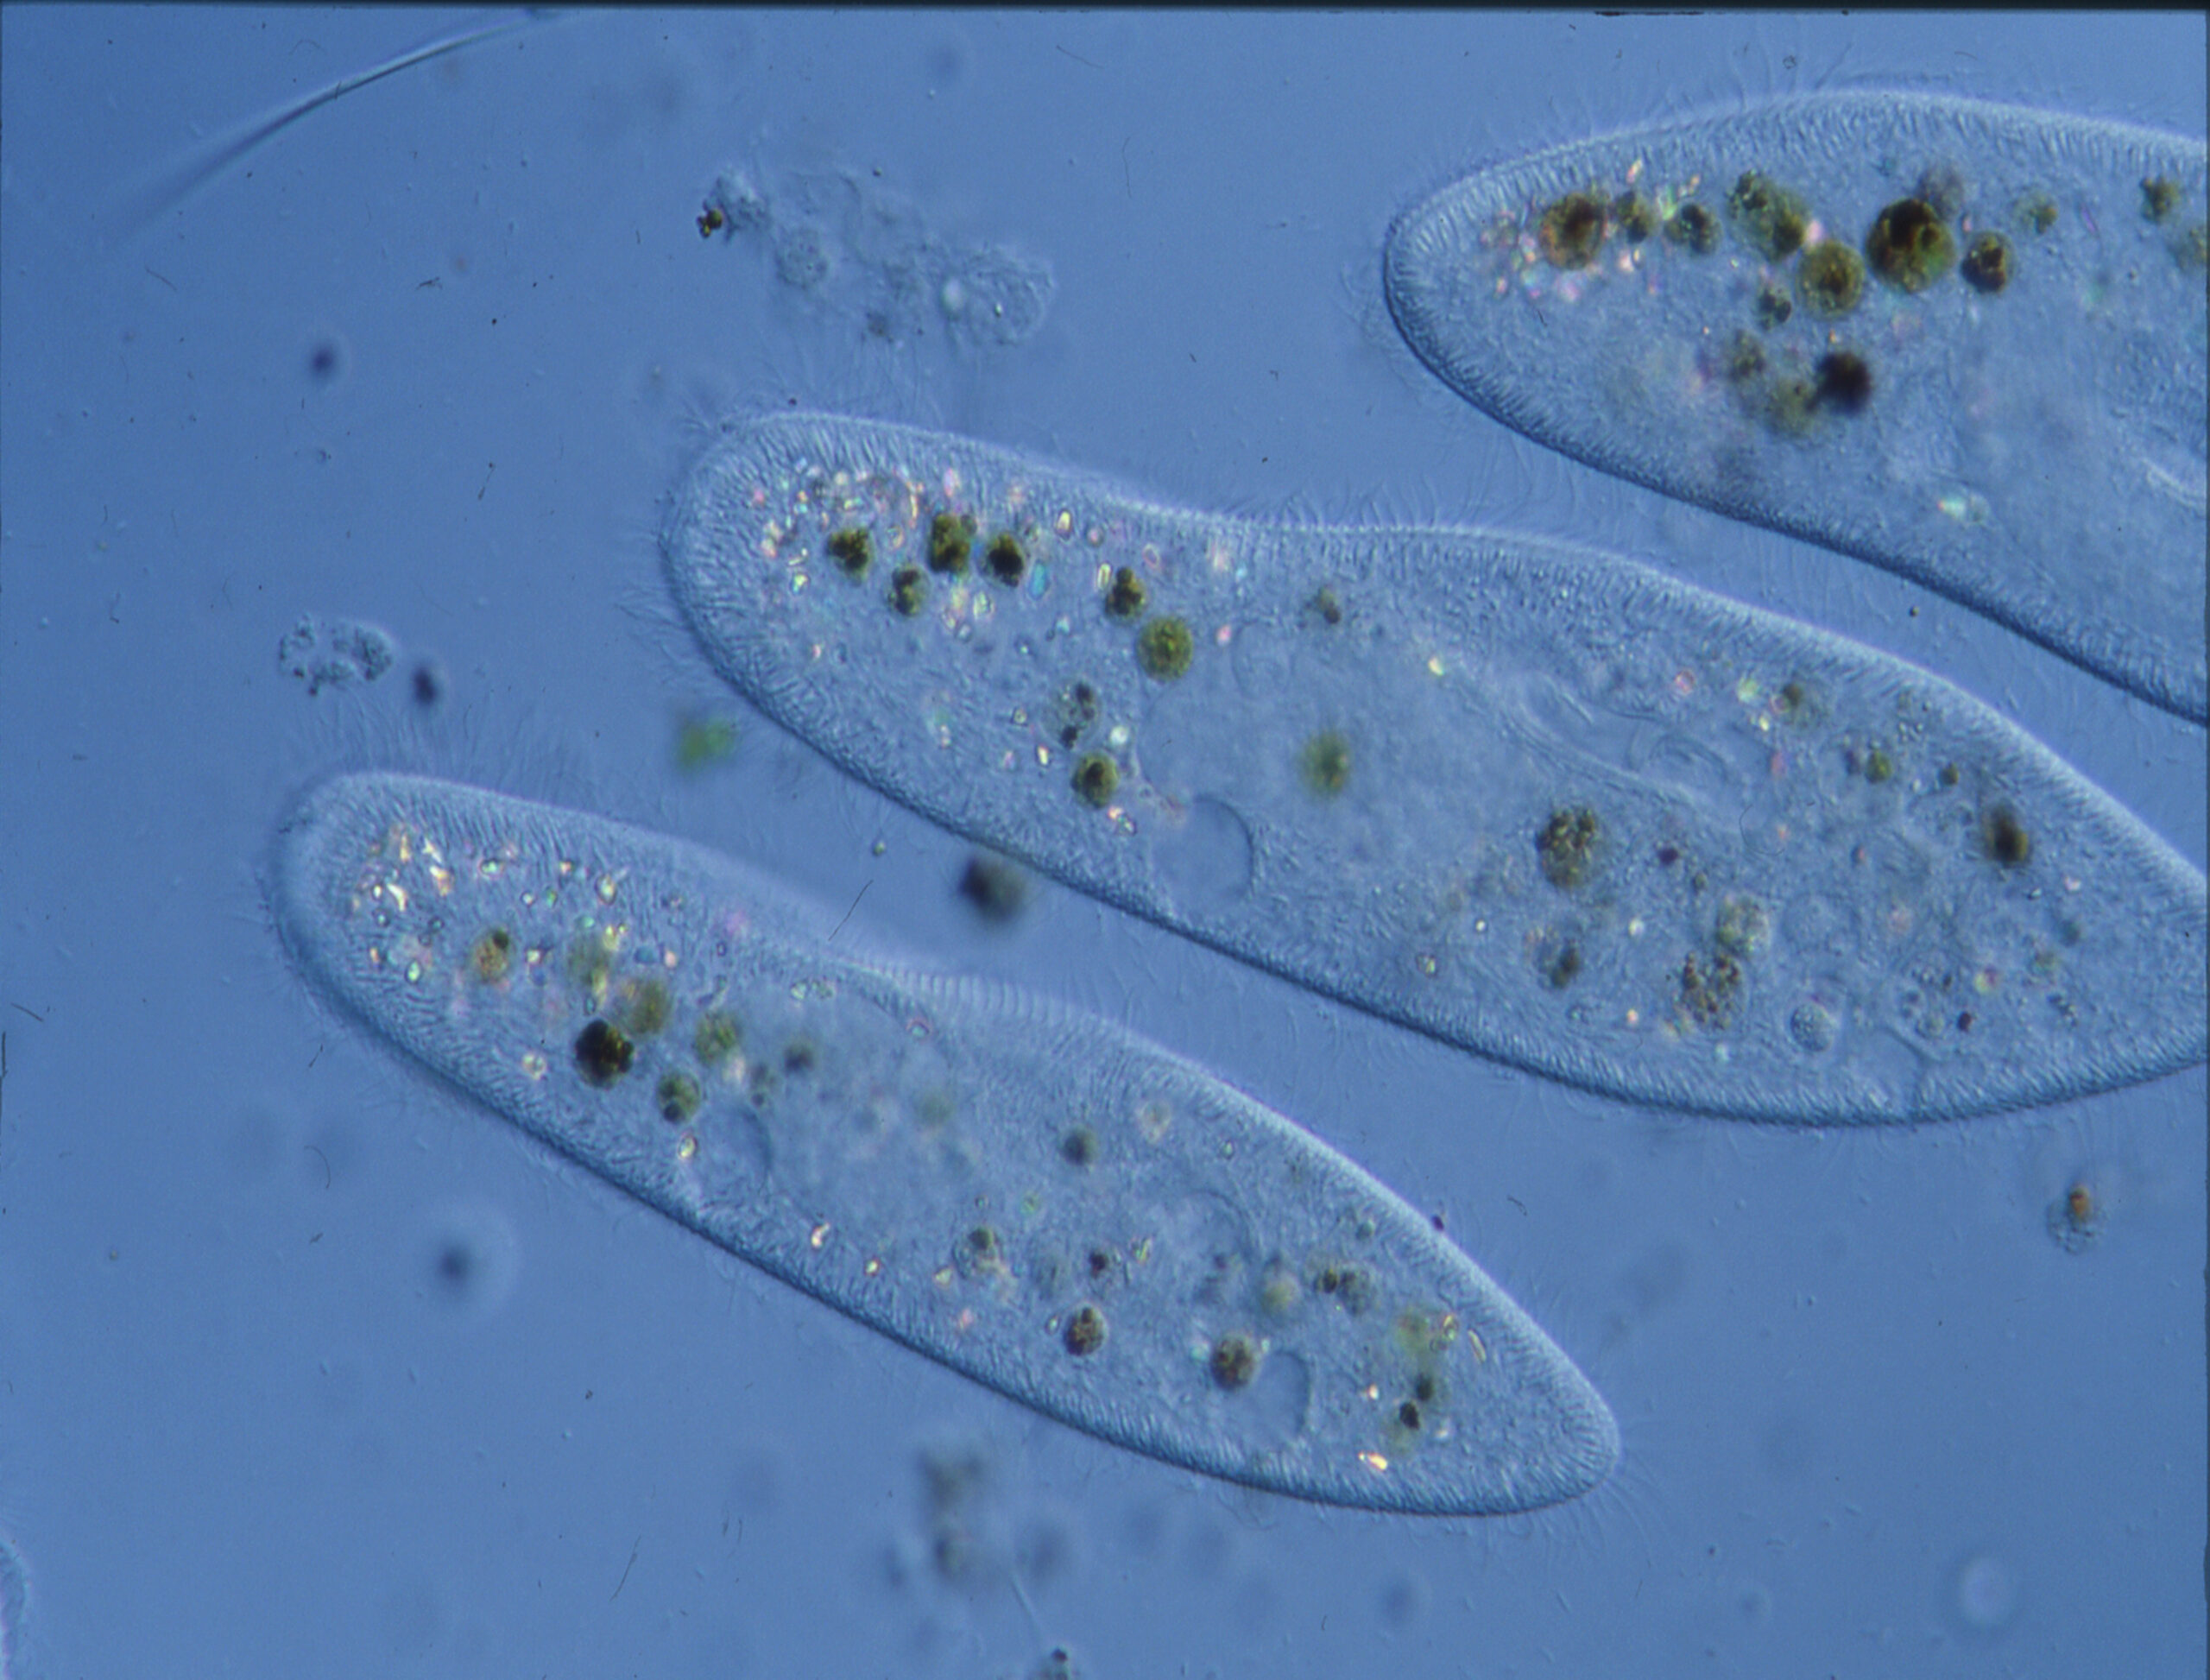 Microscopic view of water bacteria under a laboratory microscope, revealing the tiny, single-celled microorganisms in a water sample.